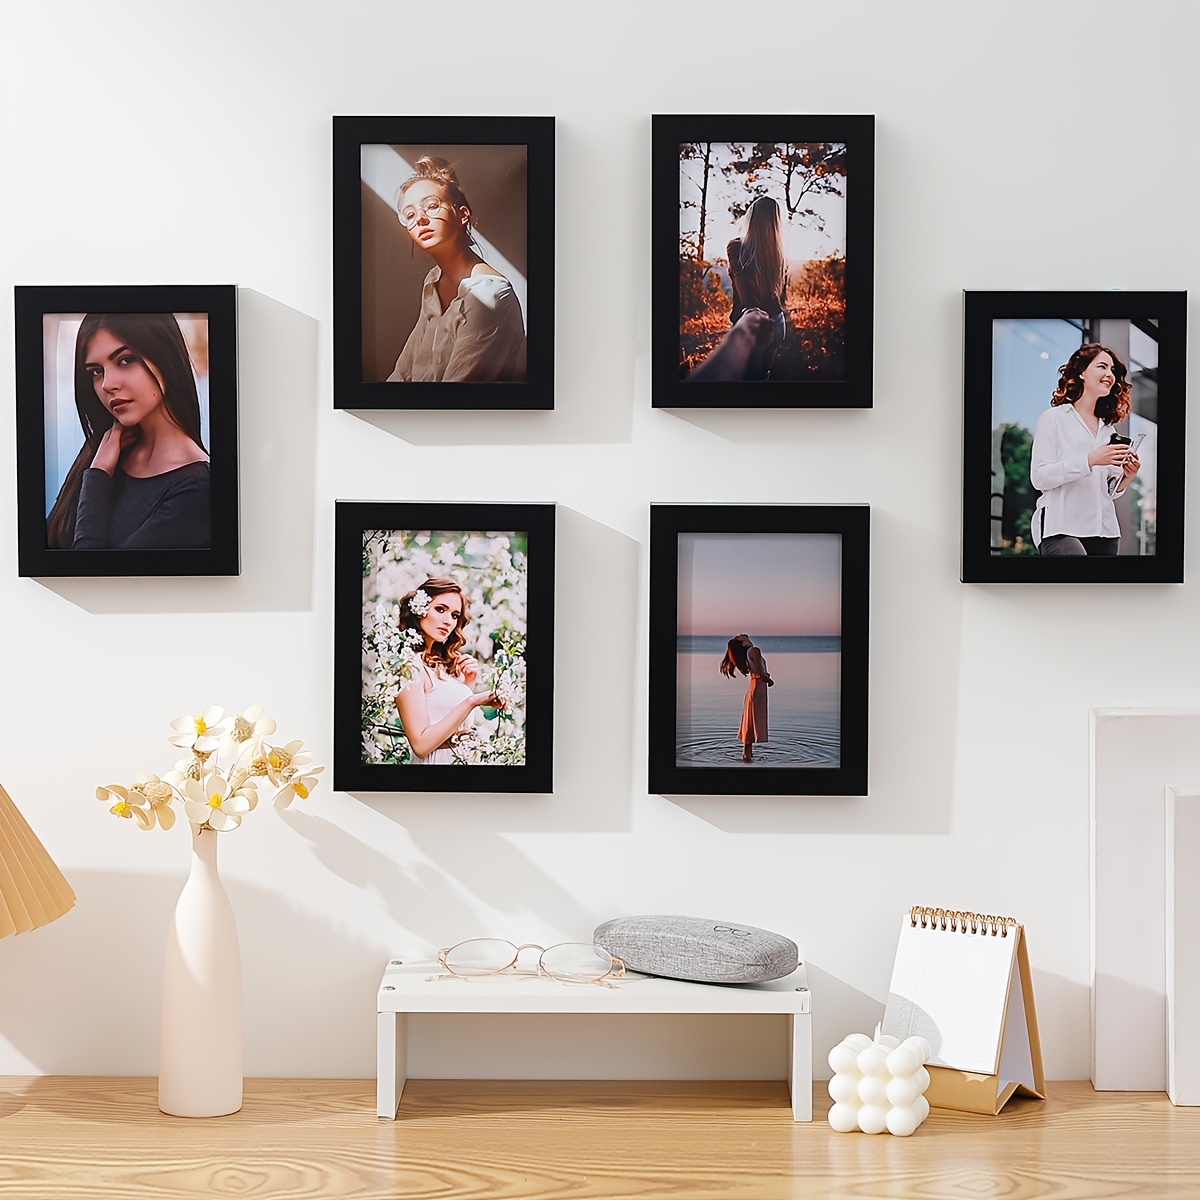 Black and White 4x6 Collage Frame - Holds 4 4x6 Photos (2 Pack)